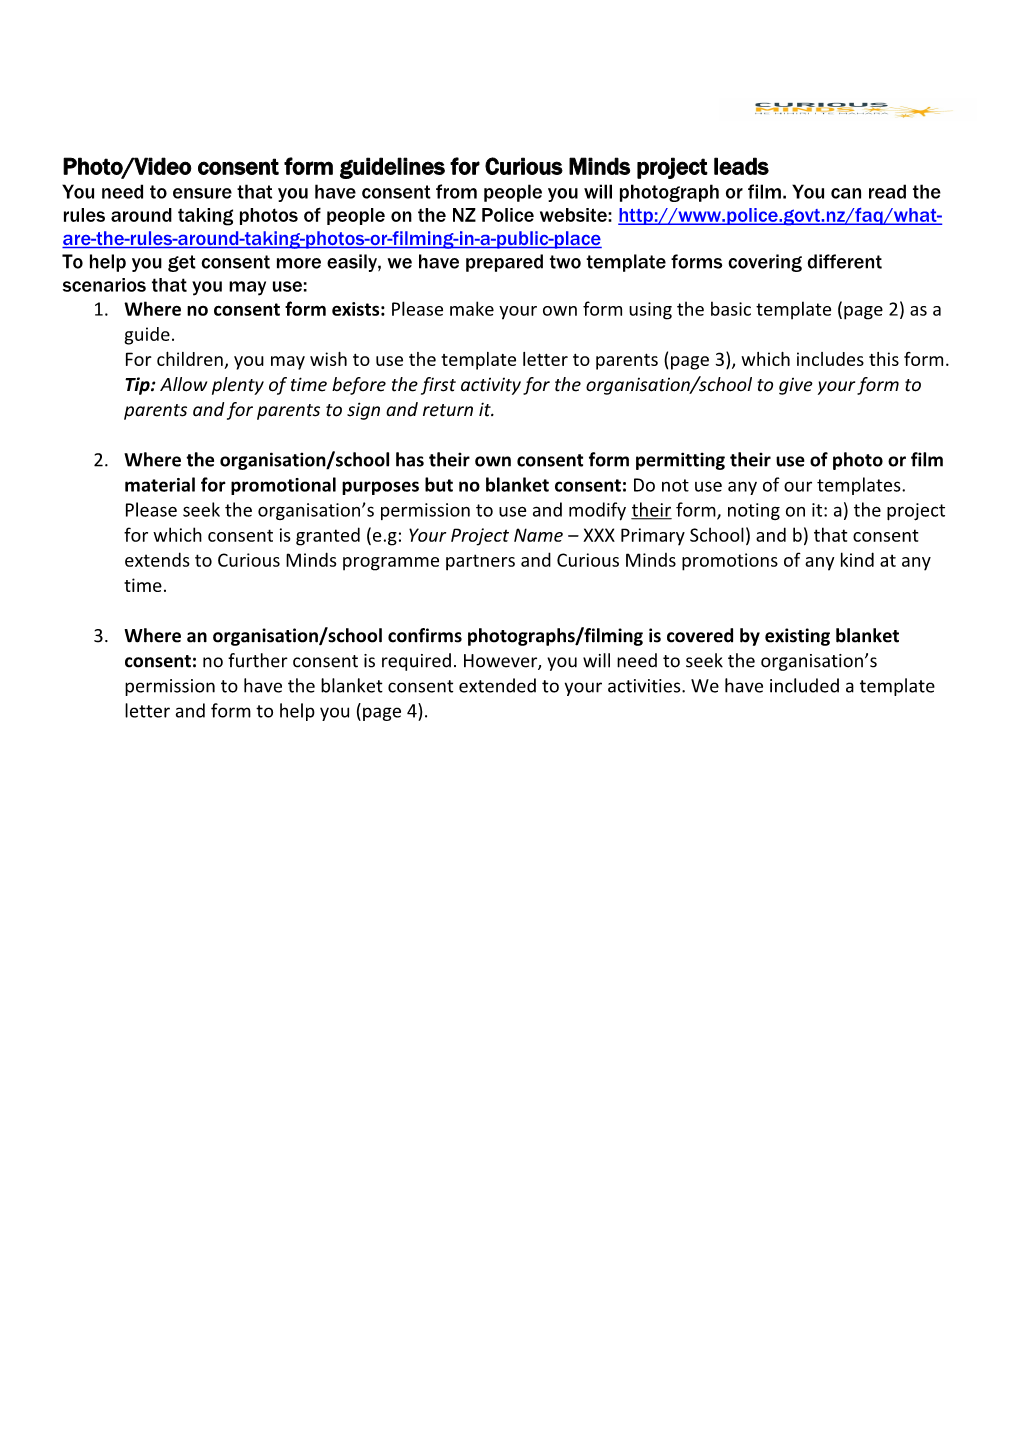 Photo/Video Consent Form Guidelines for Curious Minds Project Leads